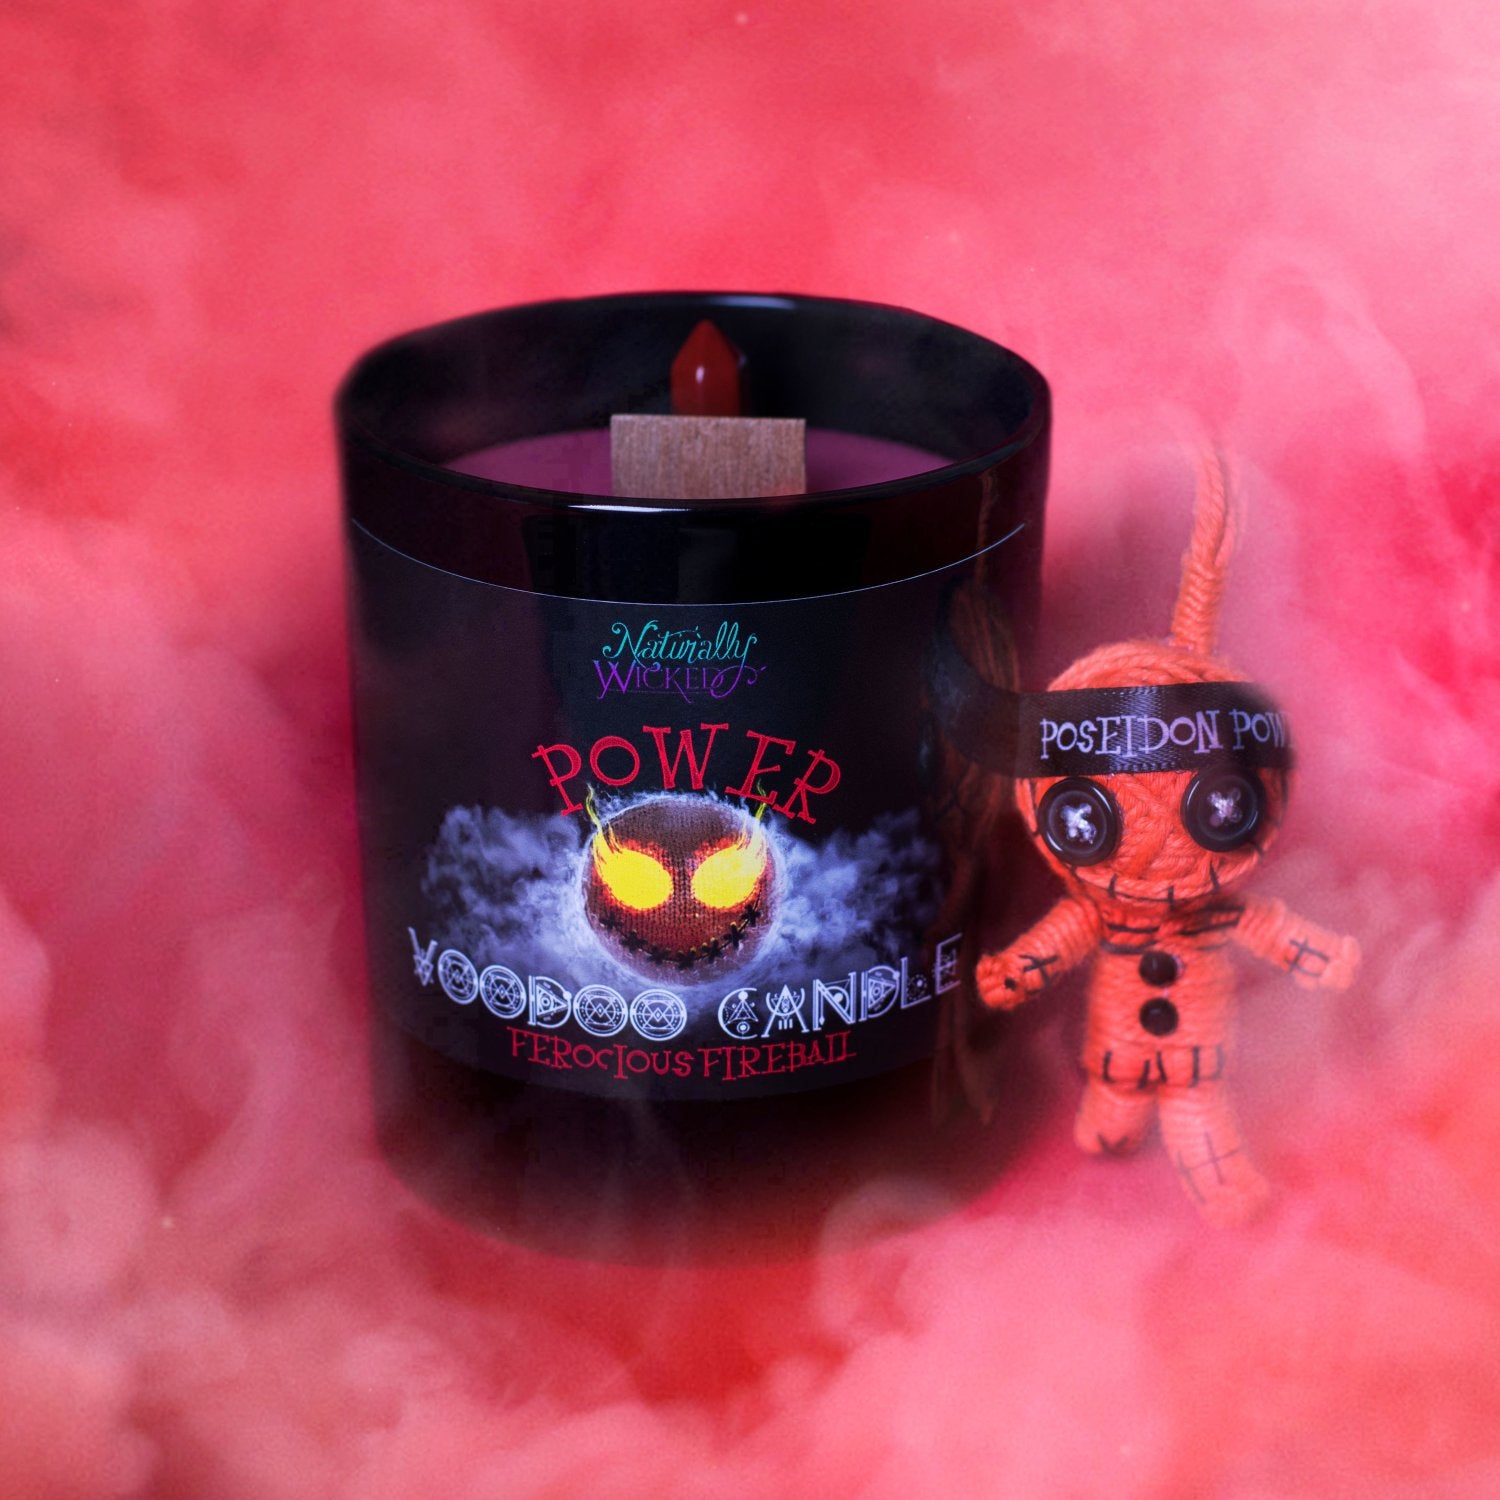 Naturally Wicked Voodoo Power Crystal Candle Alongside Danger Red Voodoo Doll; Poseidon Power